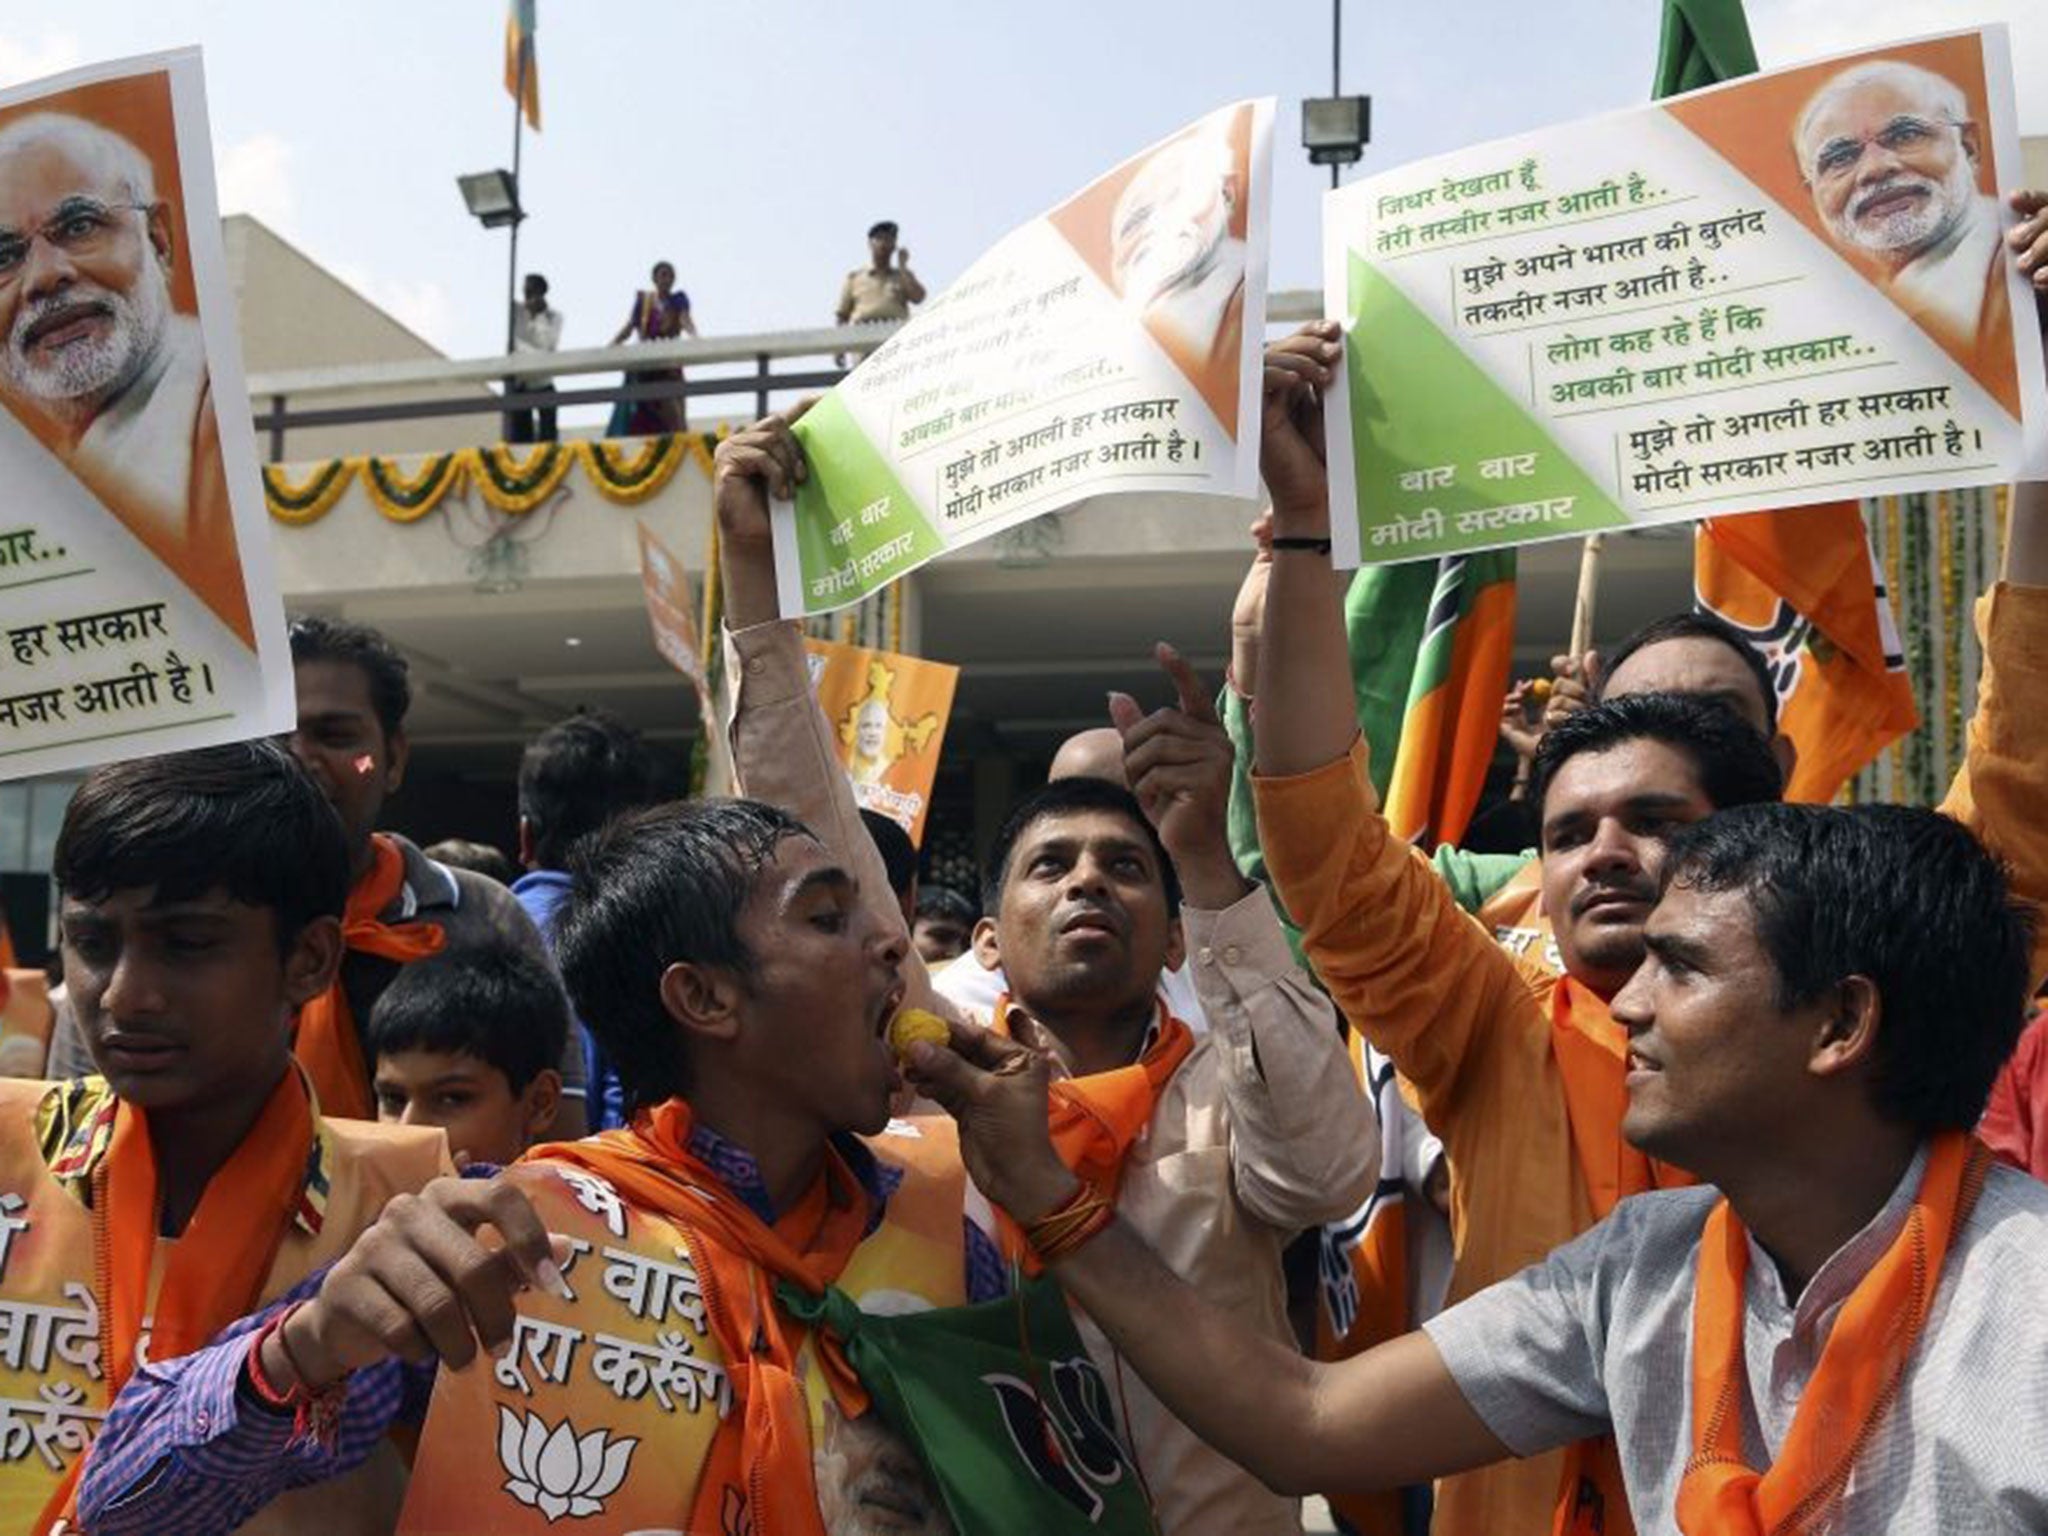 Supporters of Narendra Modi celebrate by dancing and distributing sweets at the BJP state headquarters in Gandhinagar, the capital of Gujarat